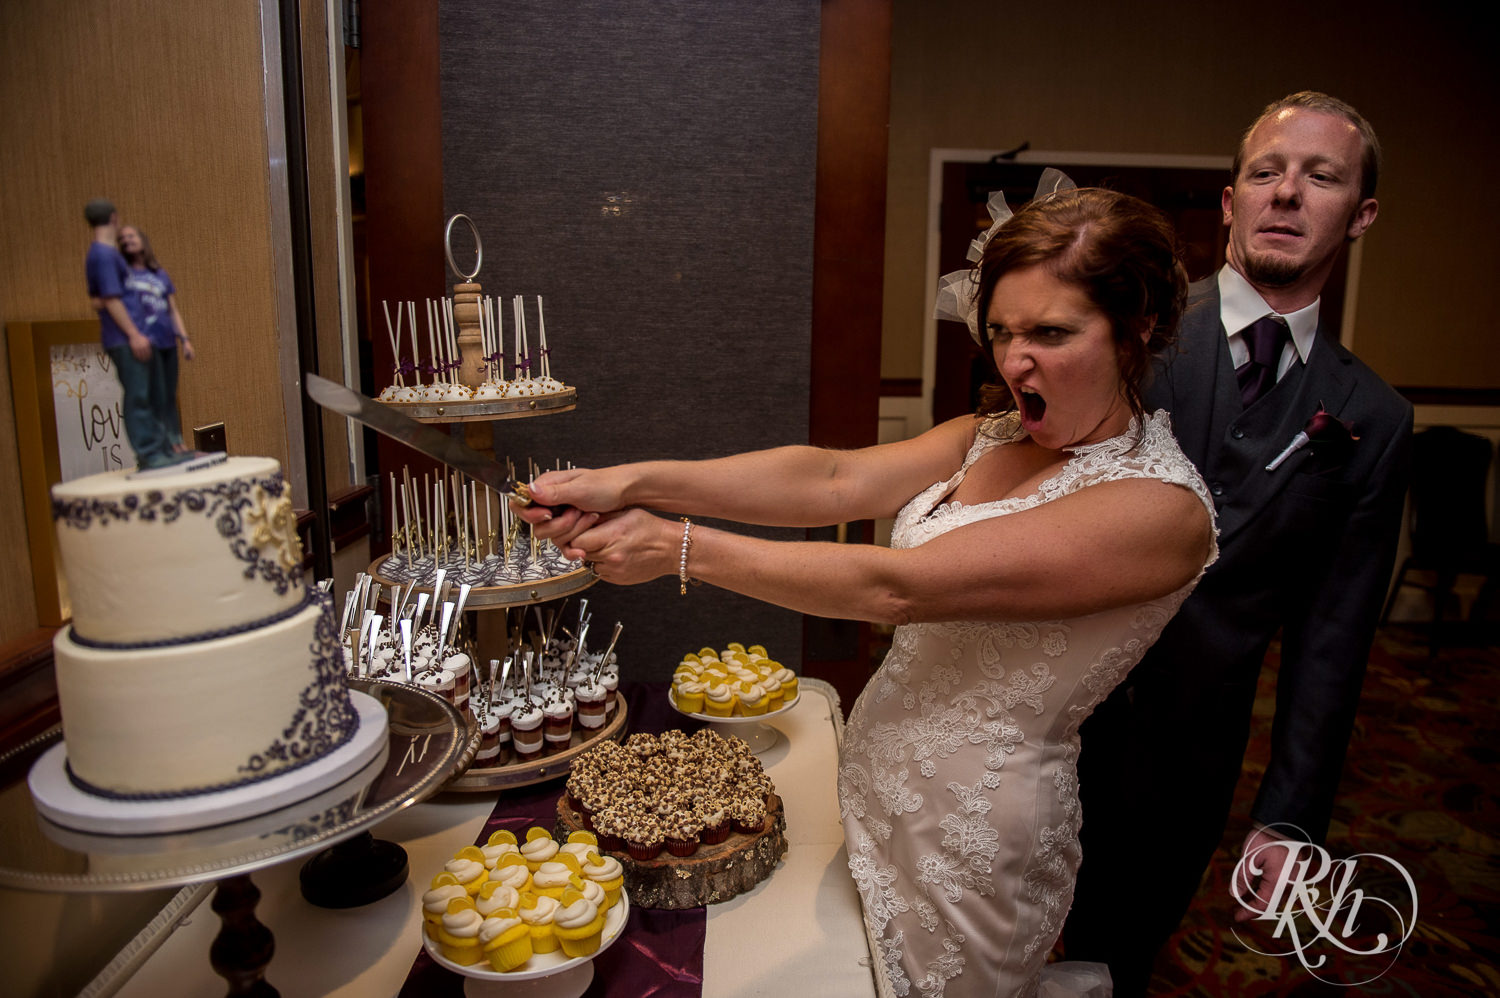 Bride and groom cut cake during wedding reception at White Bear Country Inn in White Bear Lake, Minnesota.